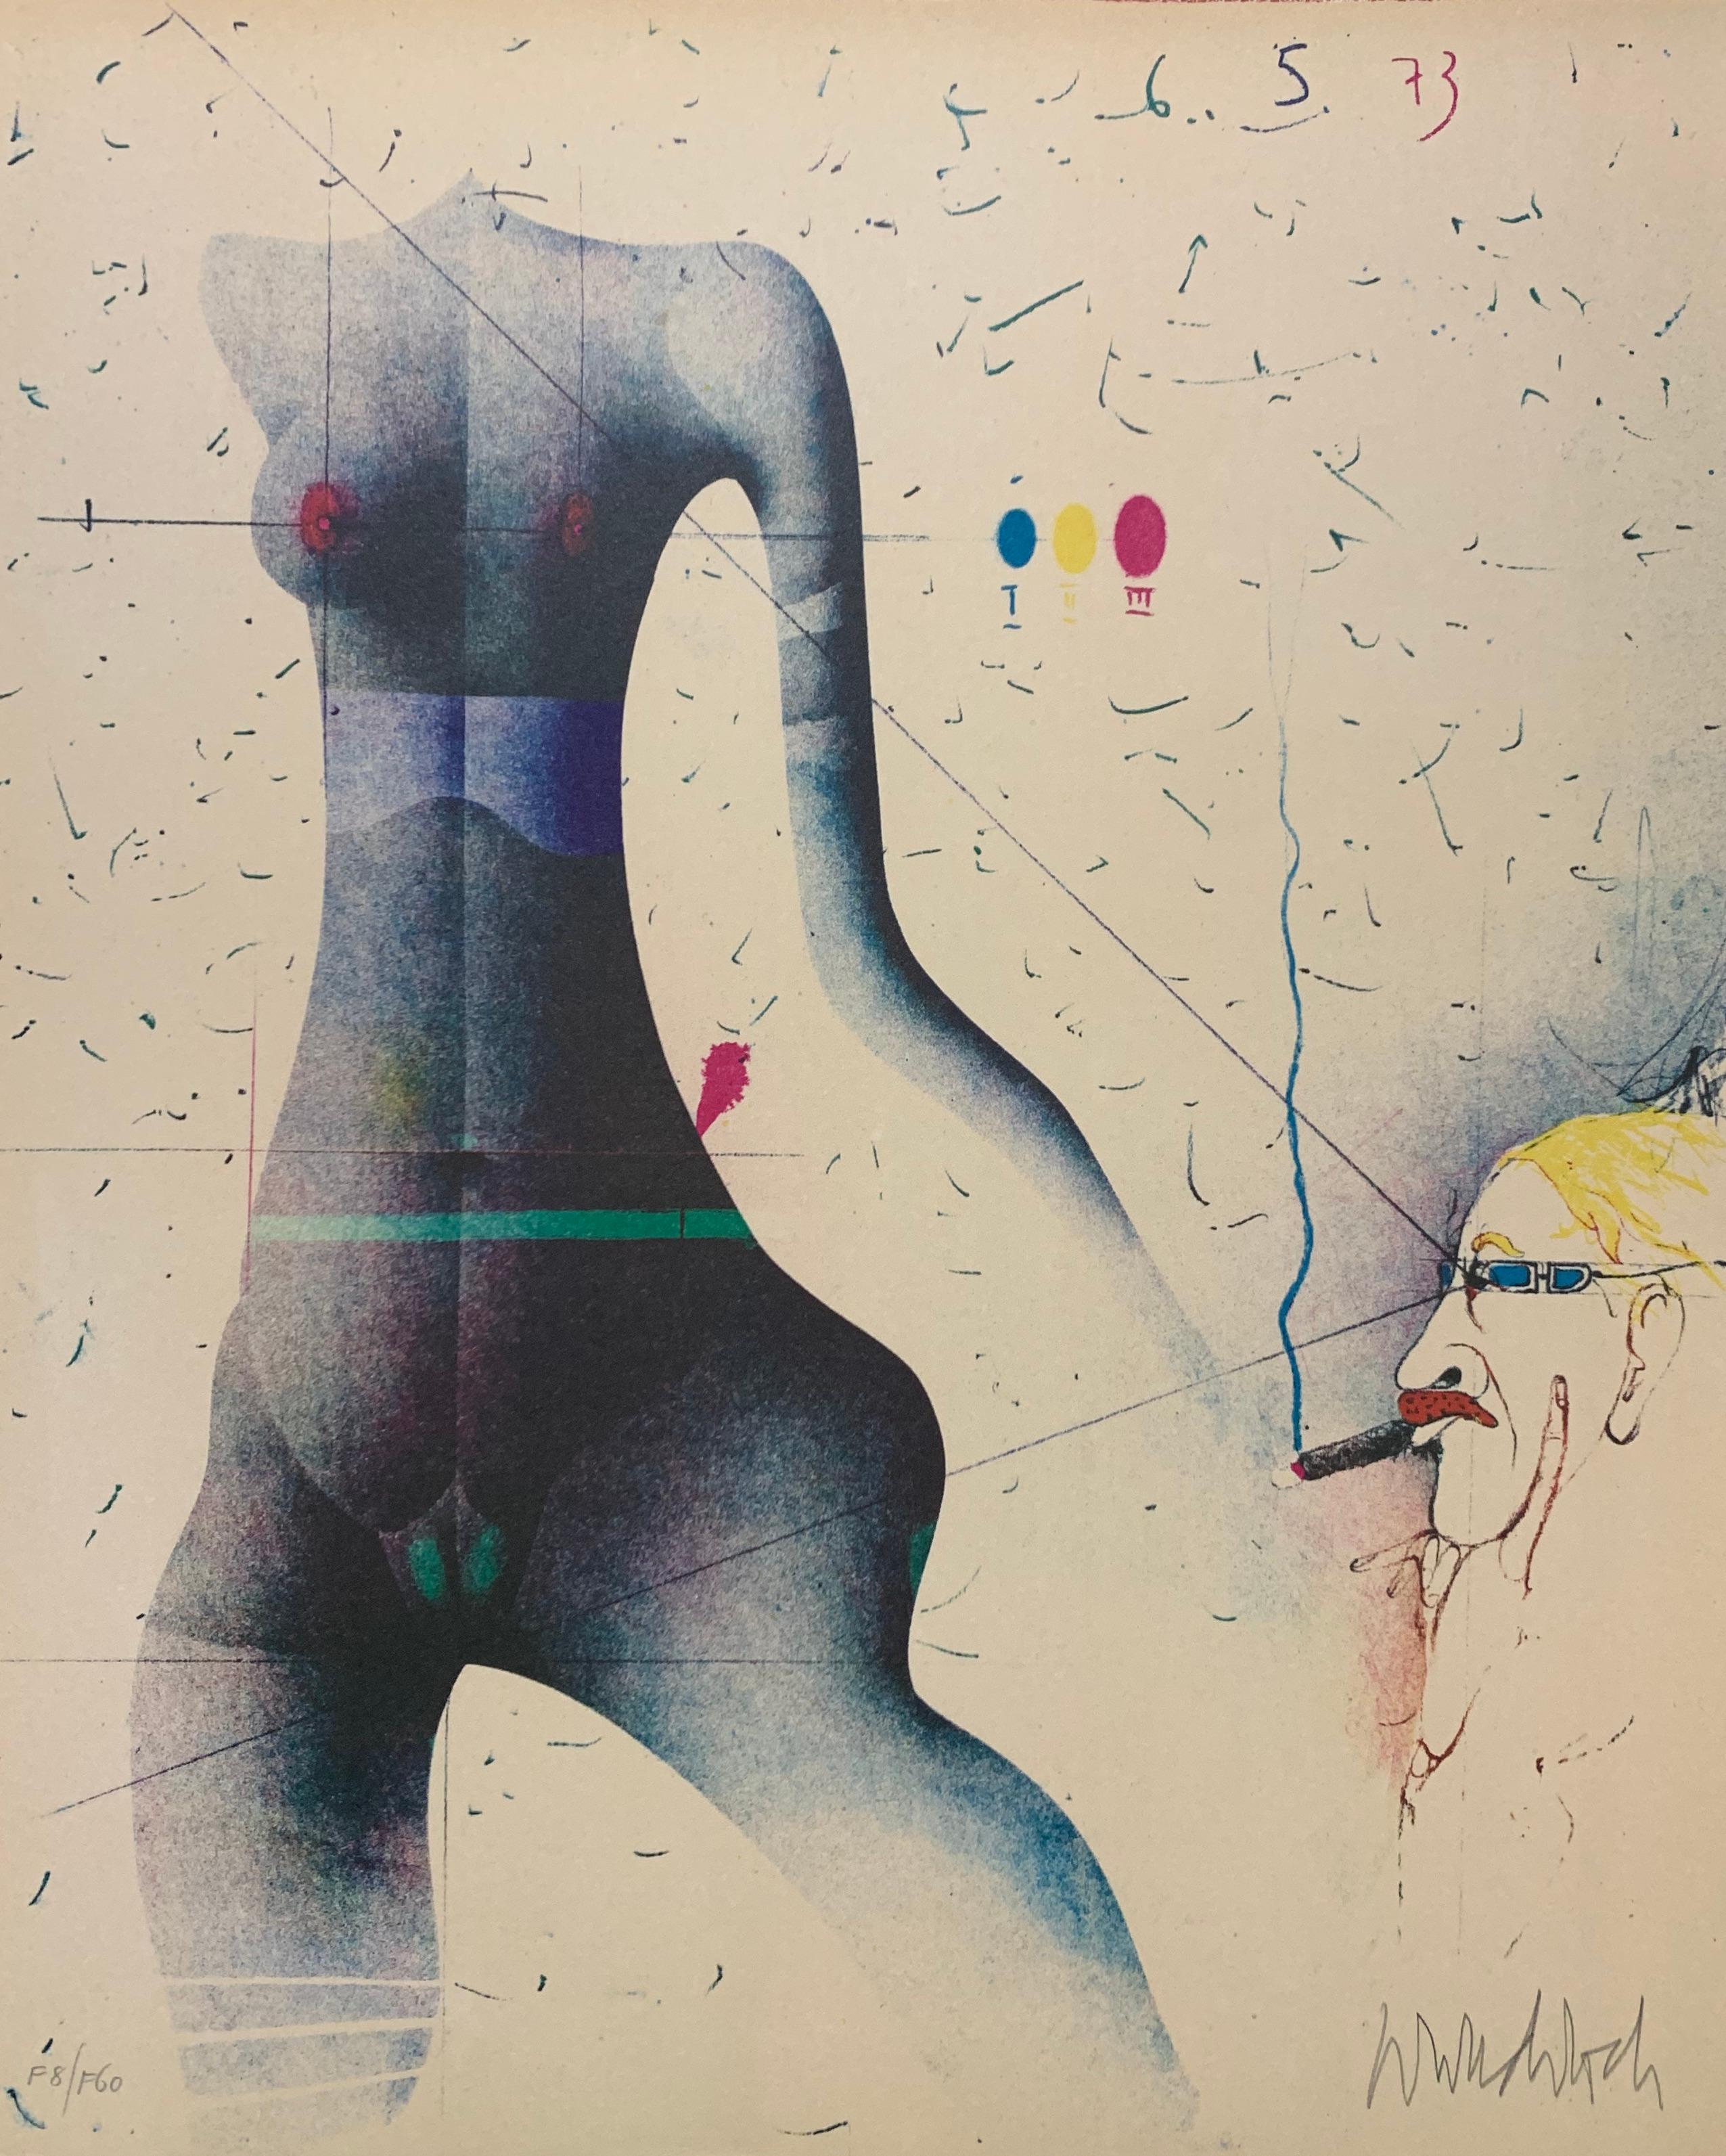 Portfolio of 5 images - Yellow Figurative Print by Paul Wunderlich